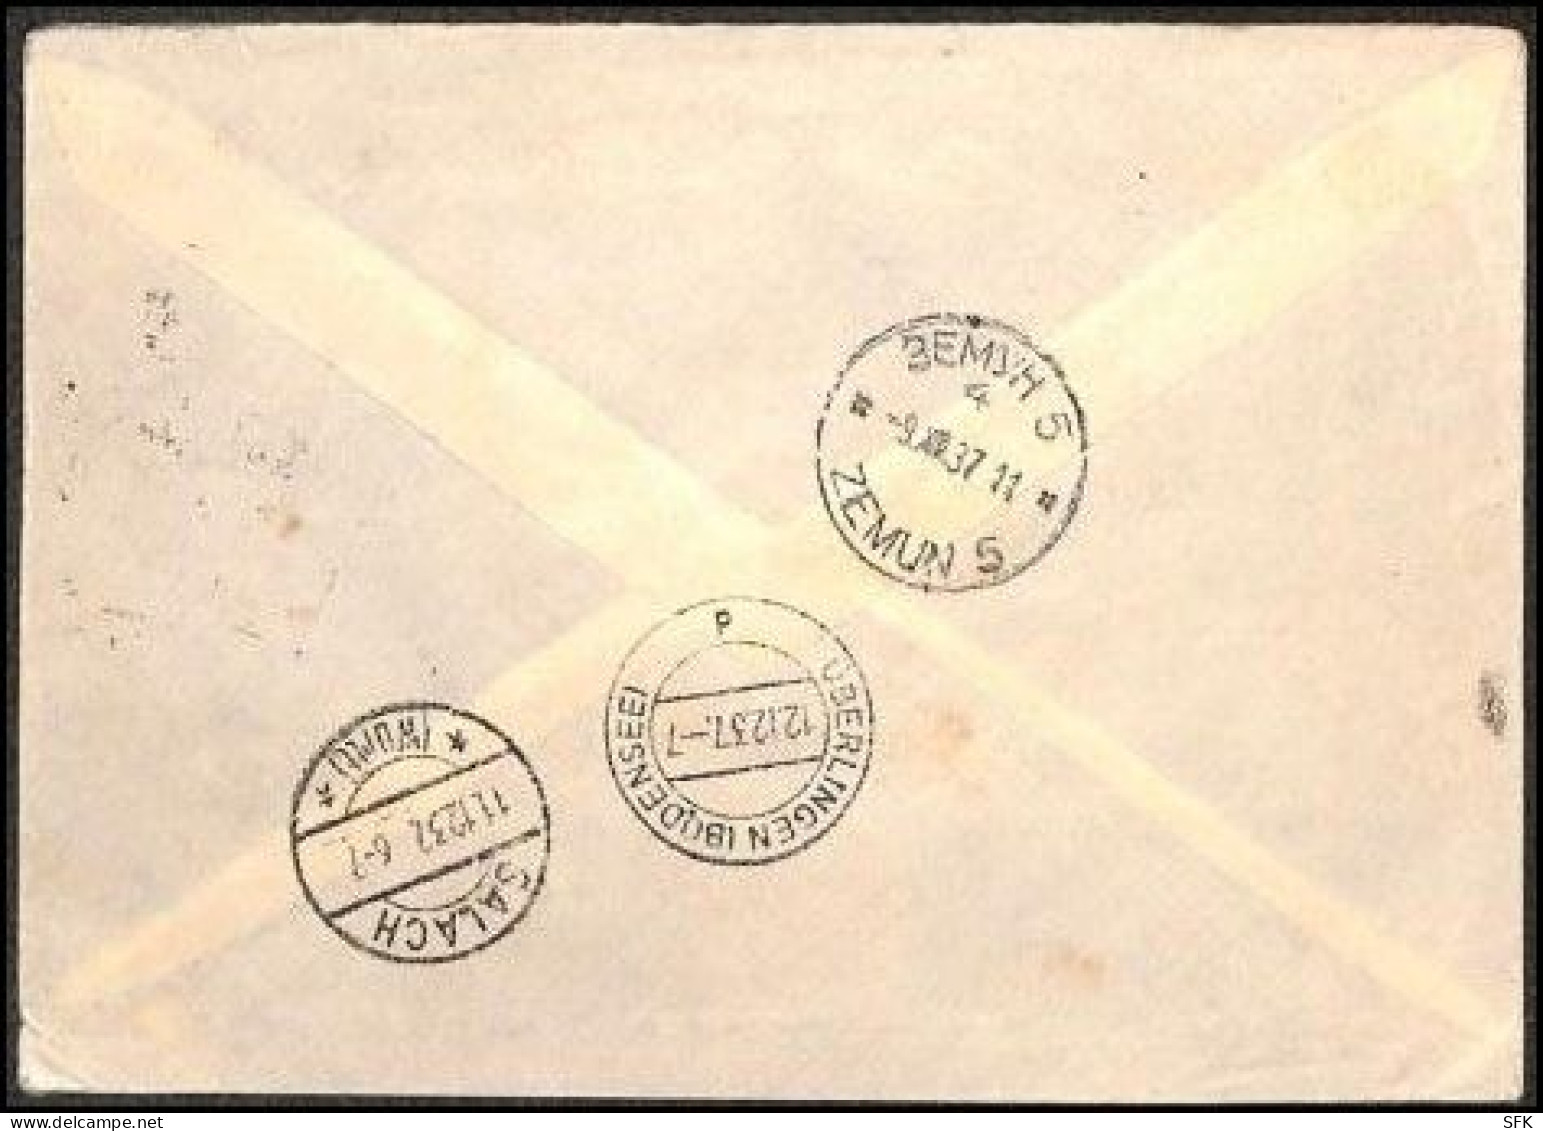 1937 Airmail Letter From Belgrade Airport Zemun 5 To Wirnterberg Sent By Lufthansa With Appropriate Franking, VF - Posta Aerea